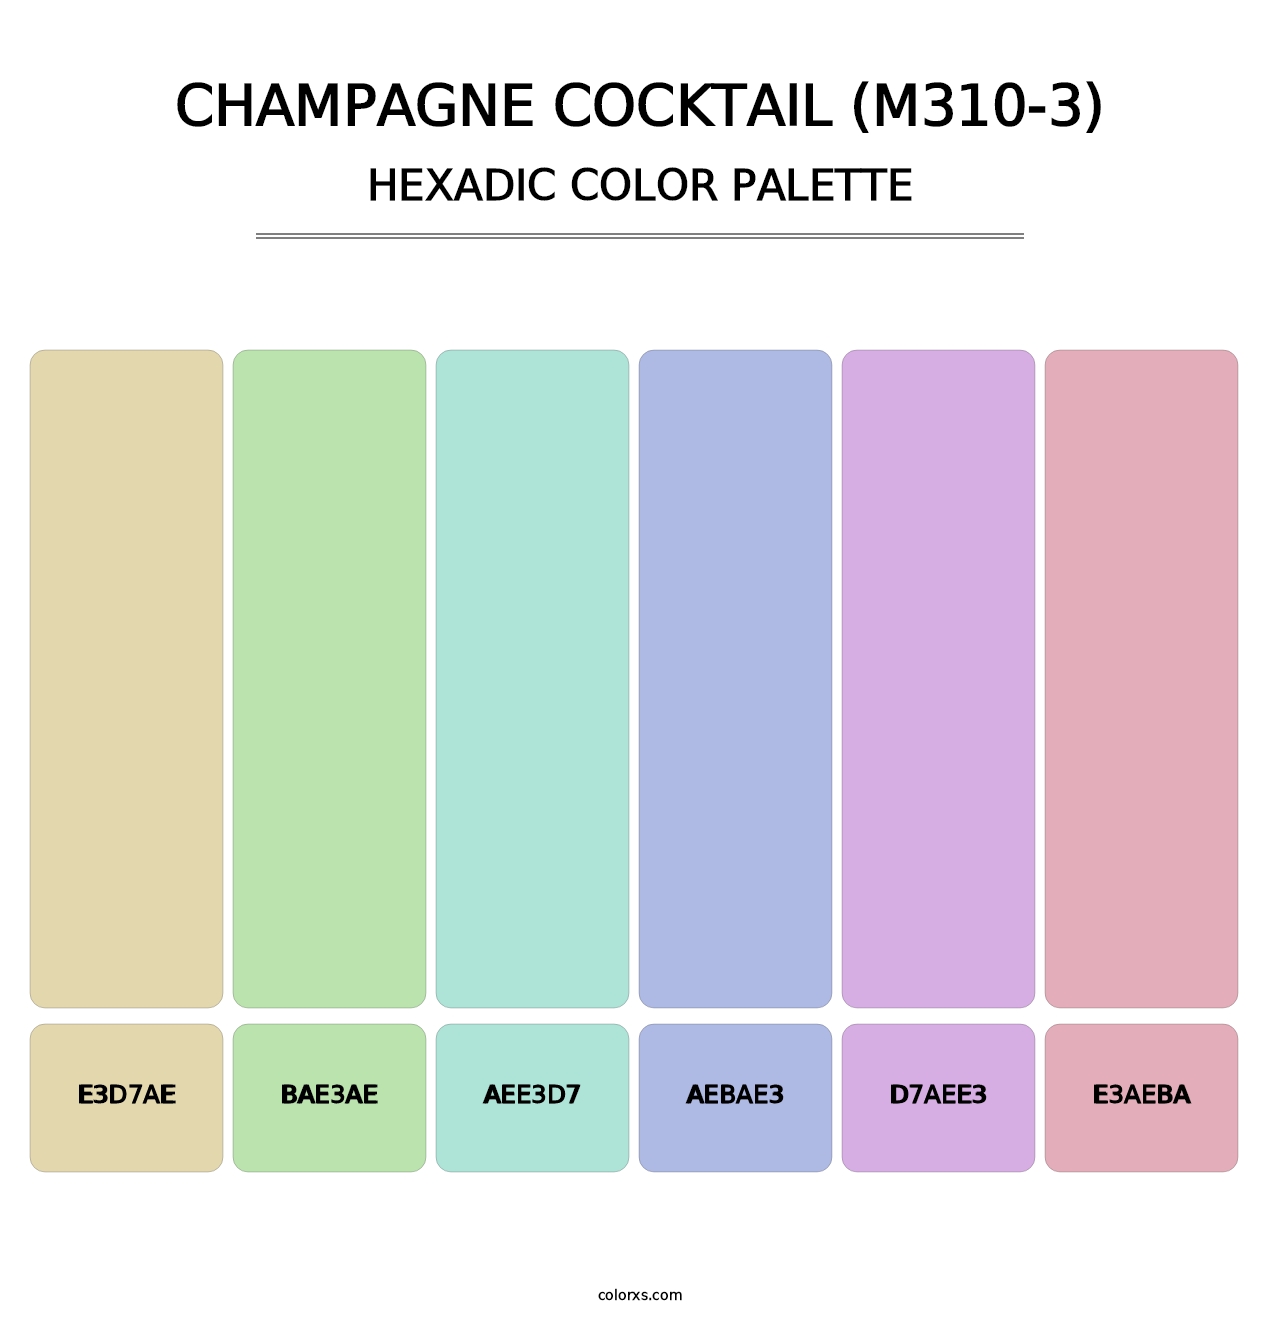 Champagne Cocktail (M310-3) - Hexadic Color Palette